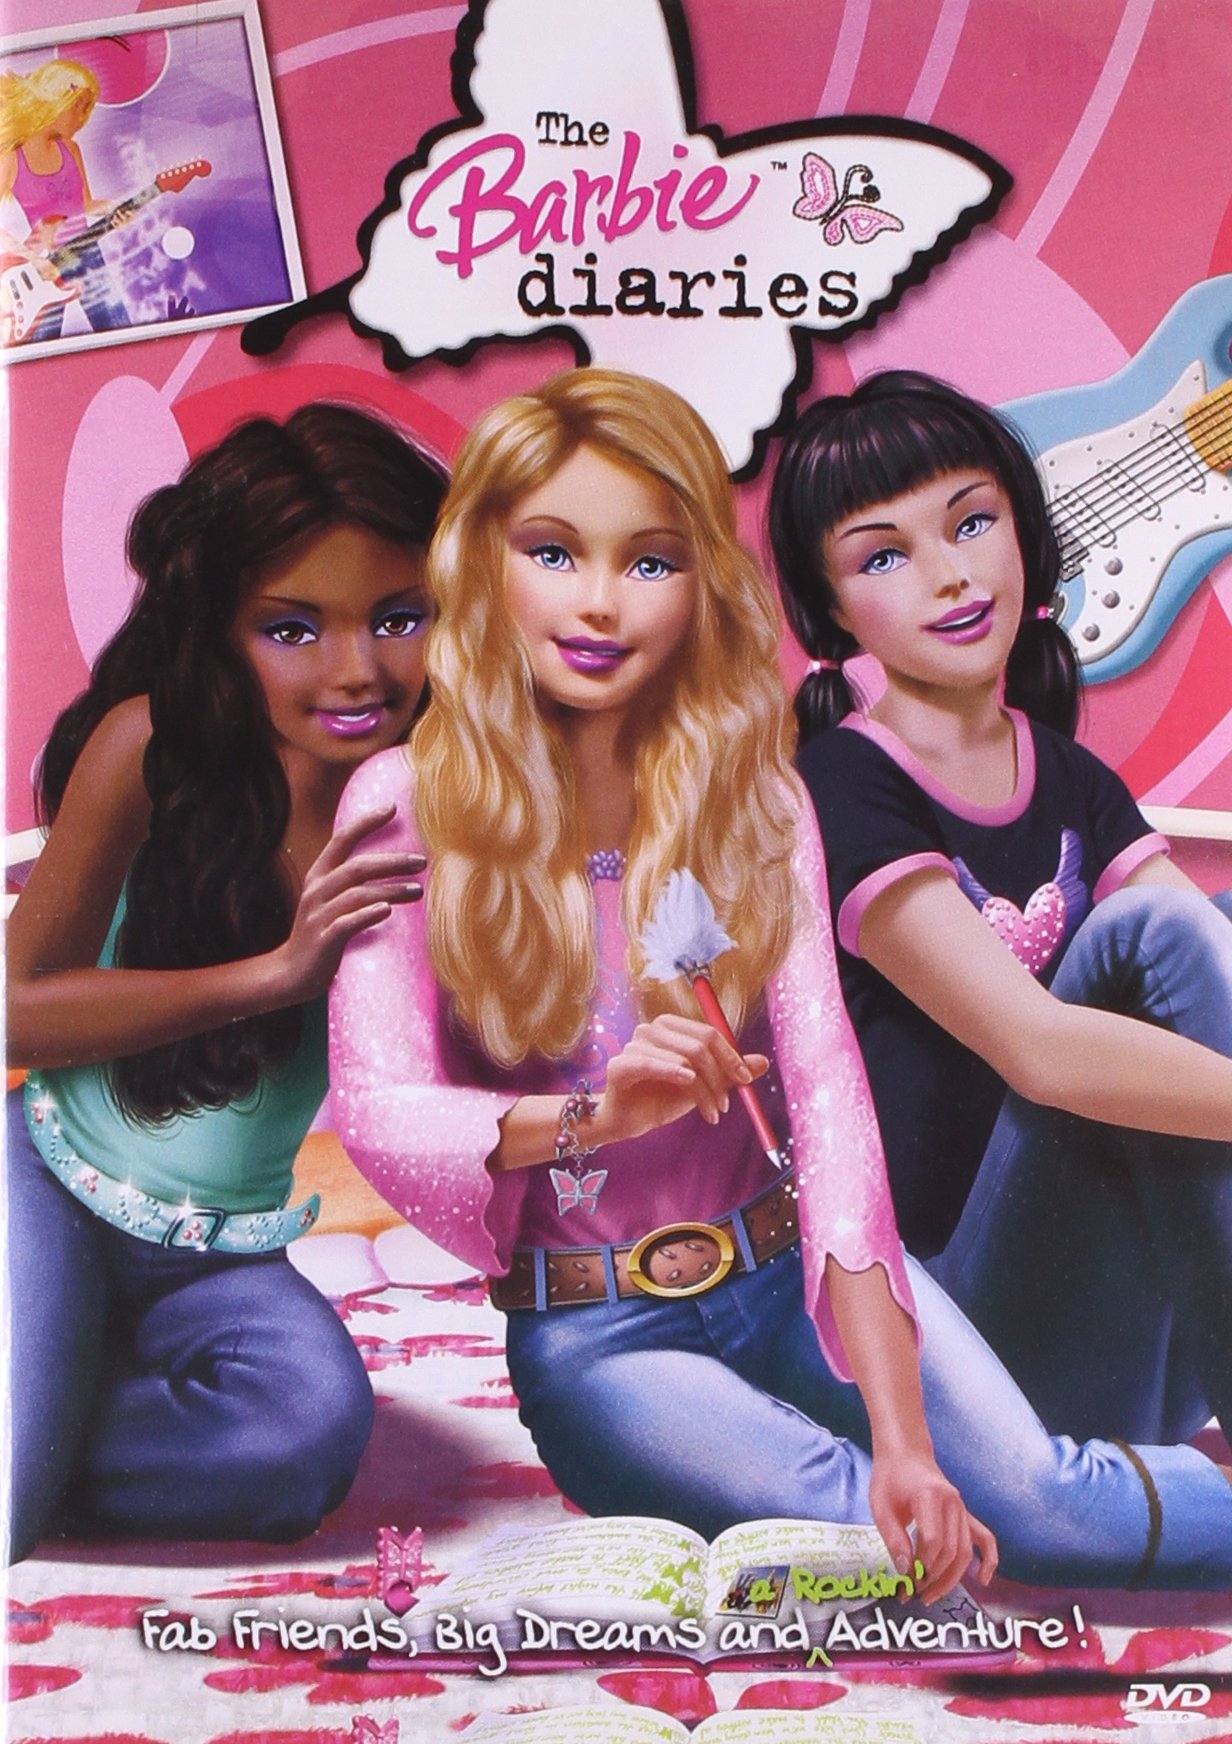 barbie-diaries-movie-purchase-or-watch-online